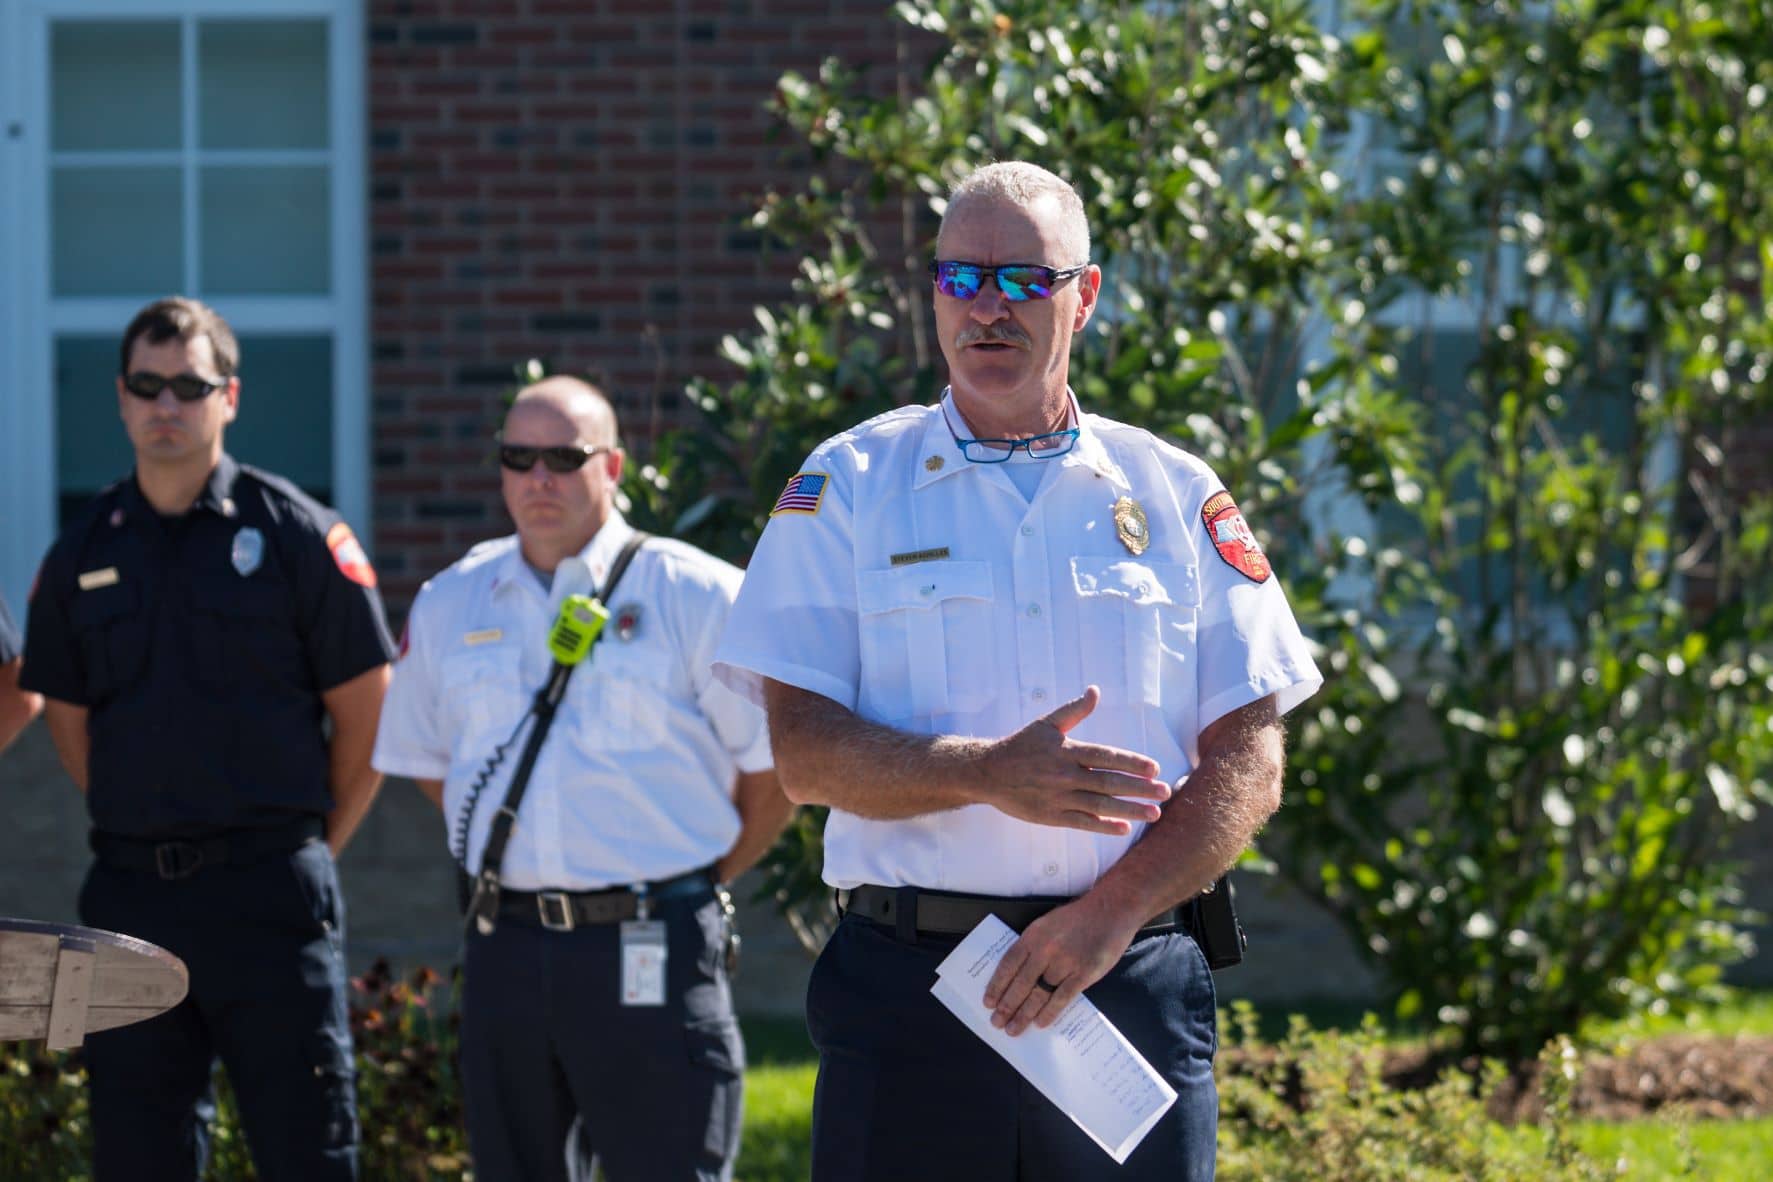 Achilles to step down as Southborough’s fire chief